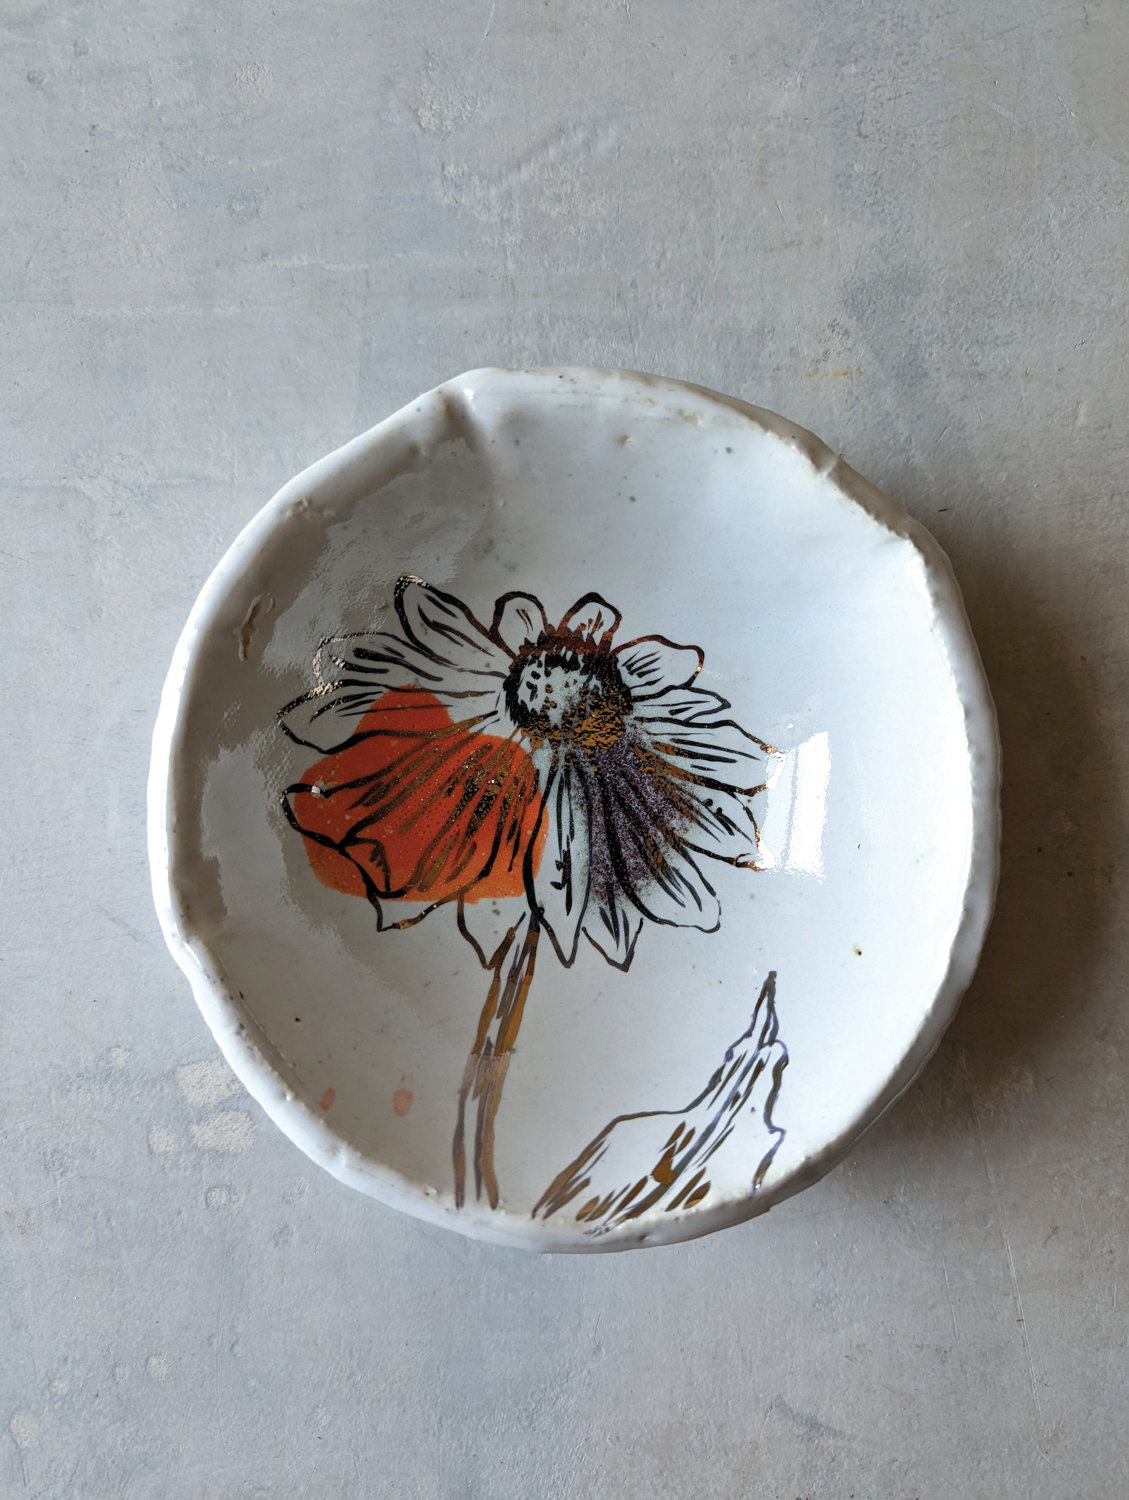 Small white ceramic dish featuring a black and red flower.